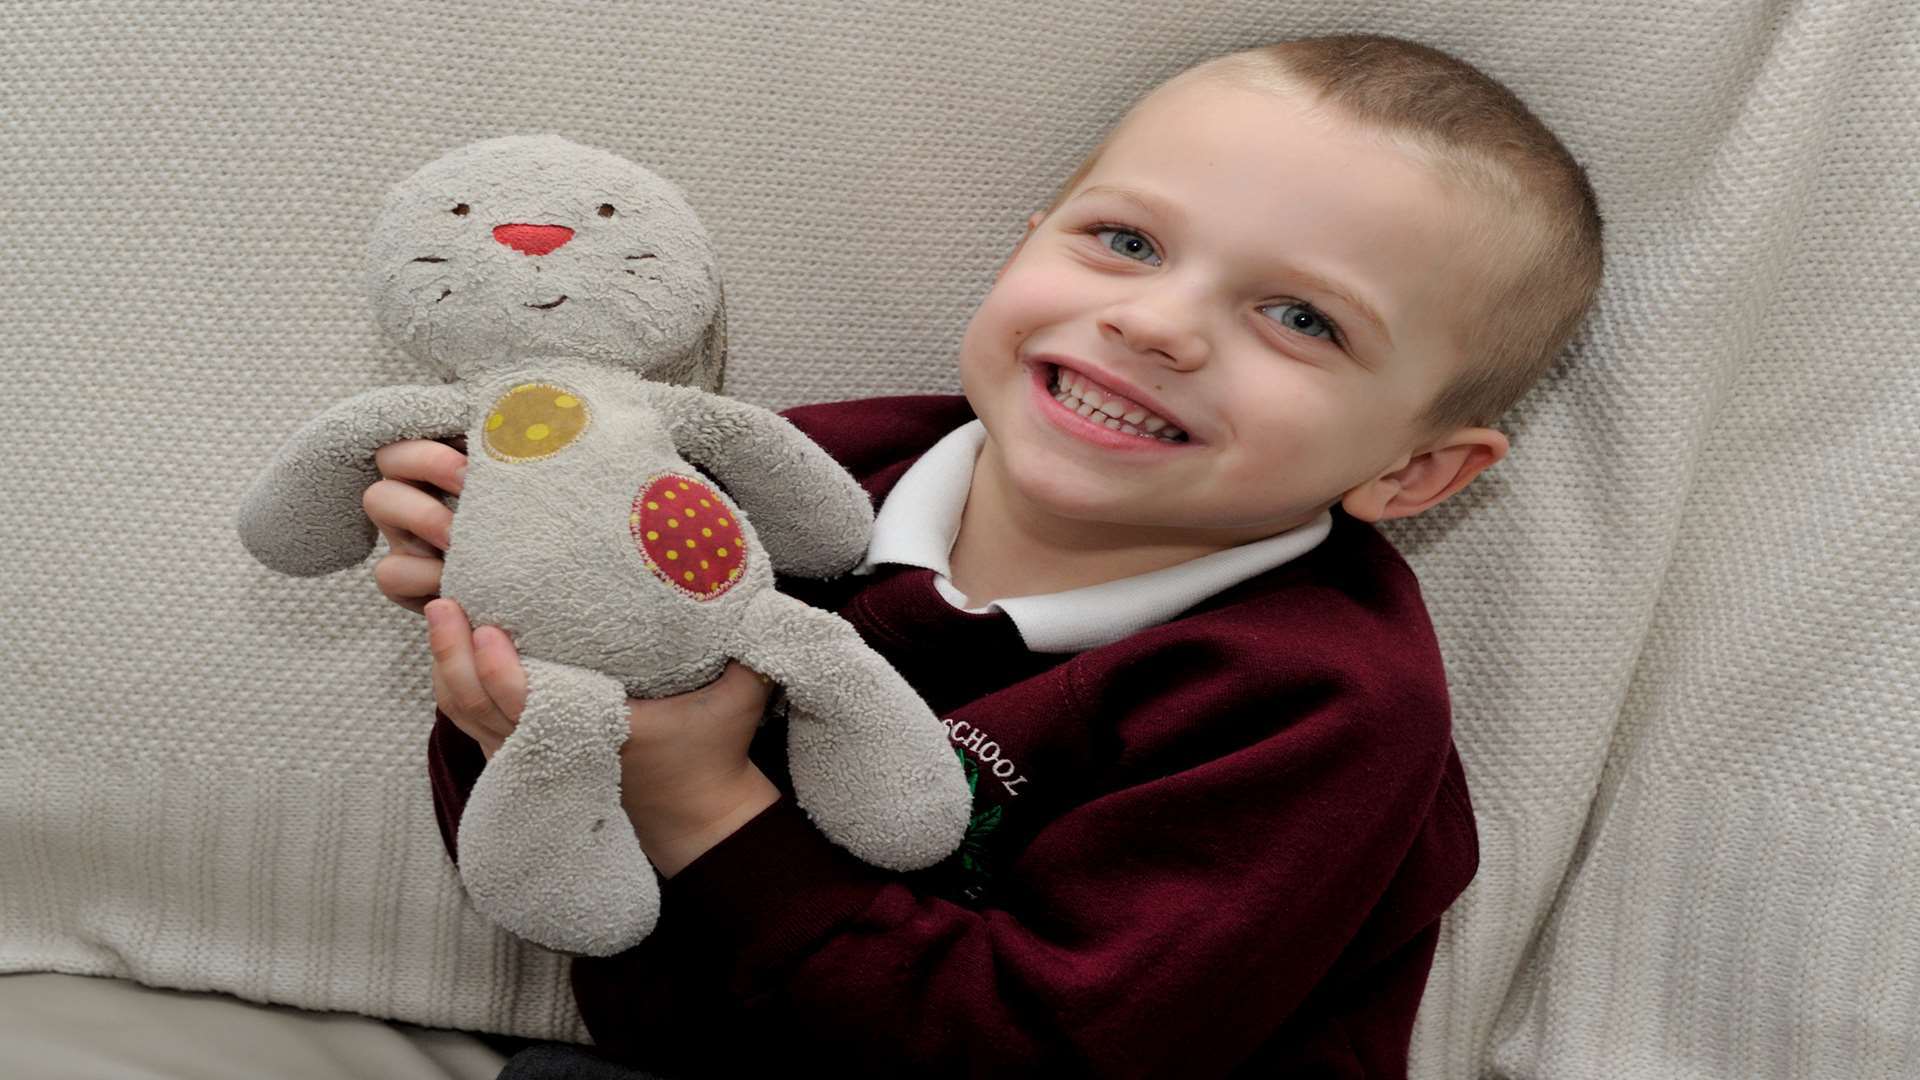 Harry Morgan, four, with a lost bunny, looking to reunite it with its owner